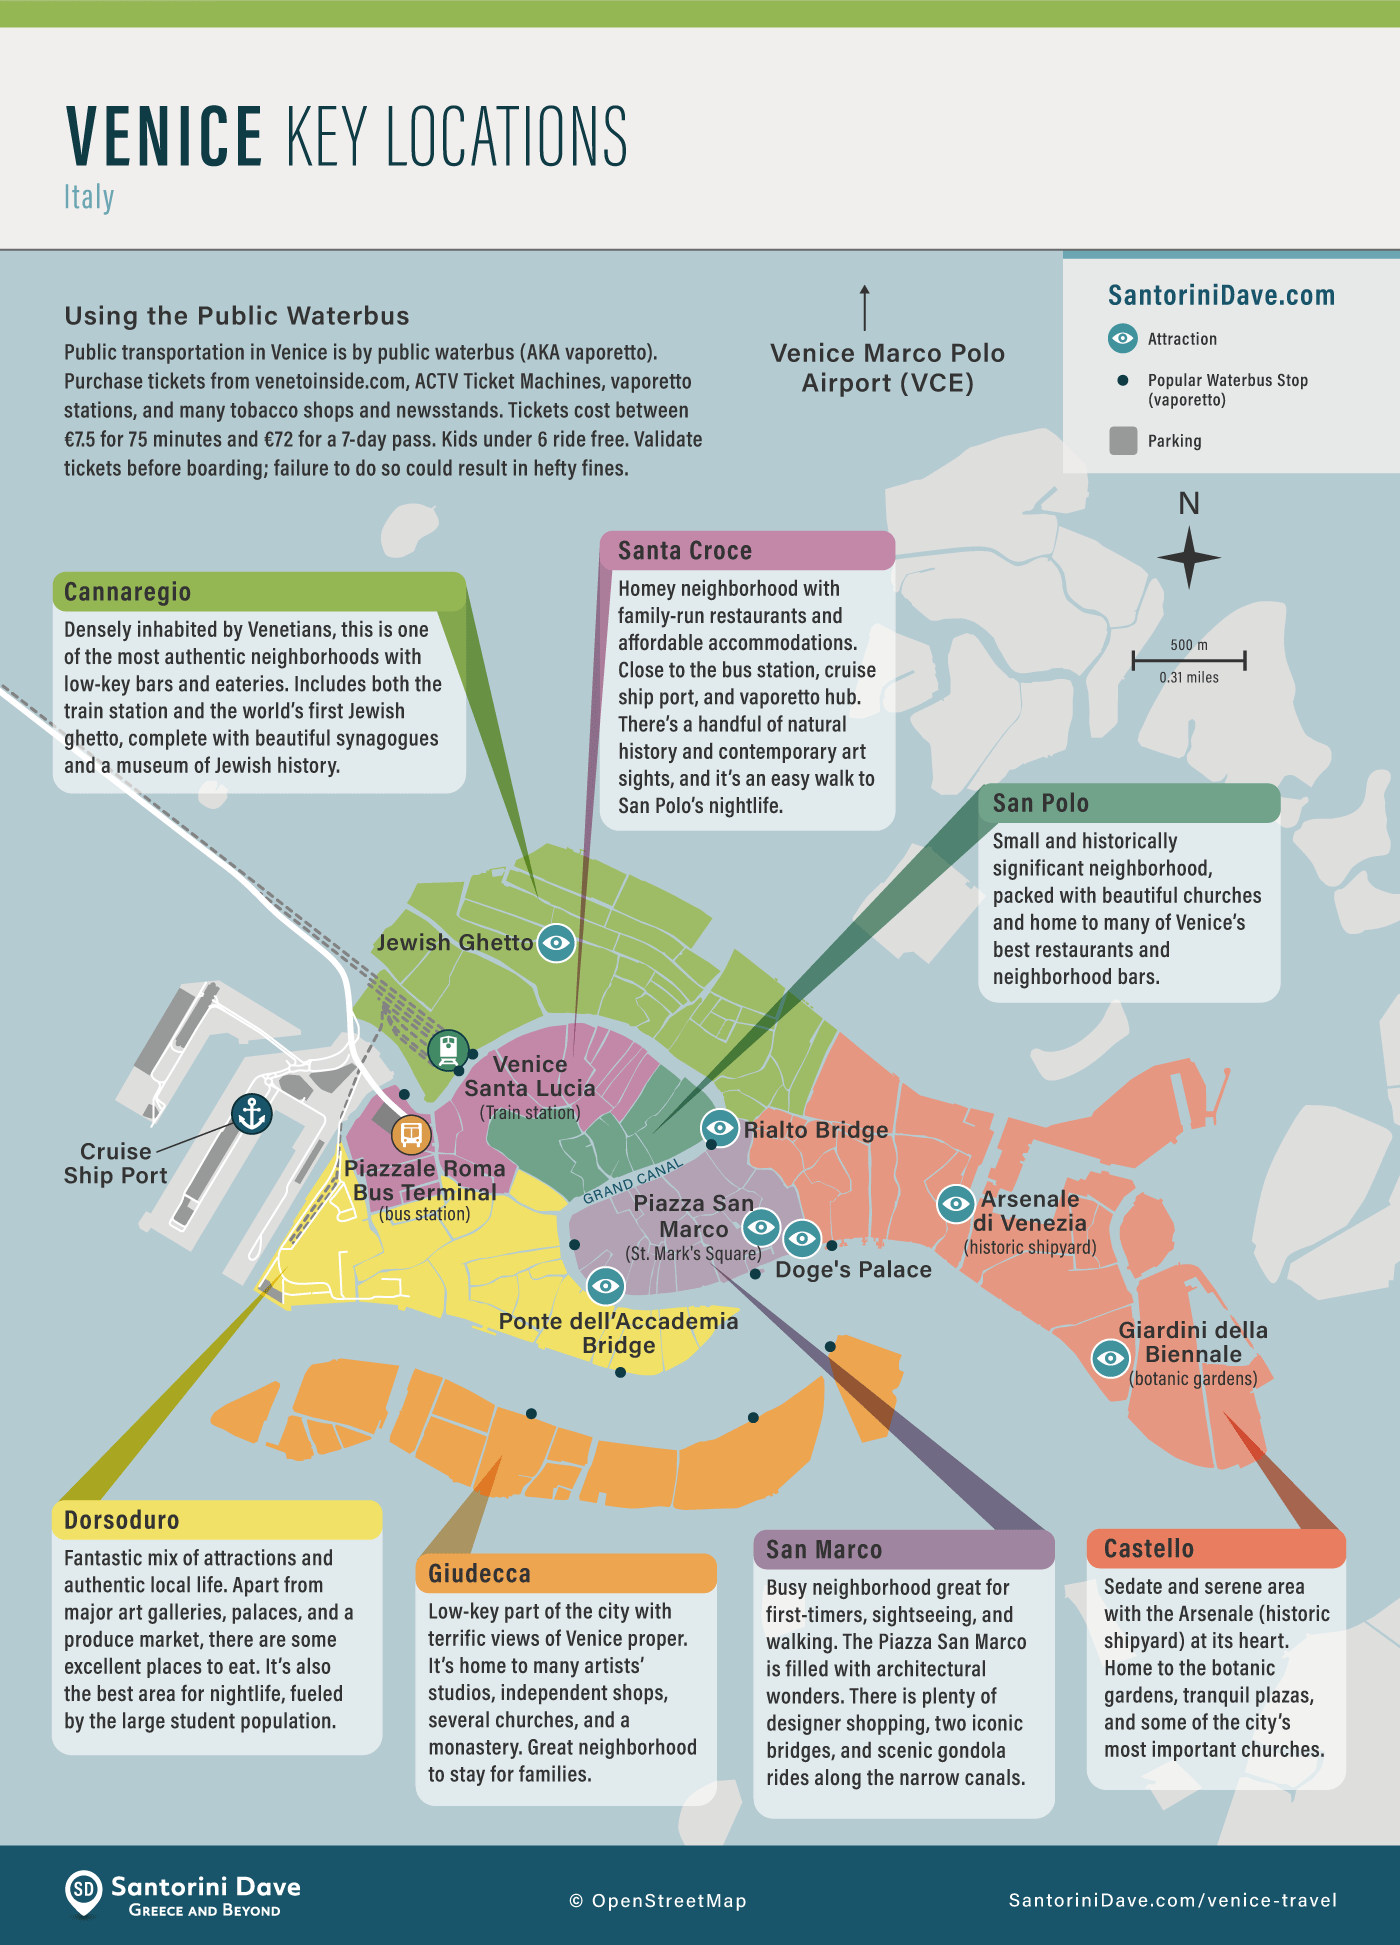 Map showing key locations and neighborhoods of Venice, Italy